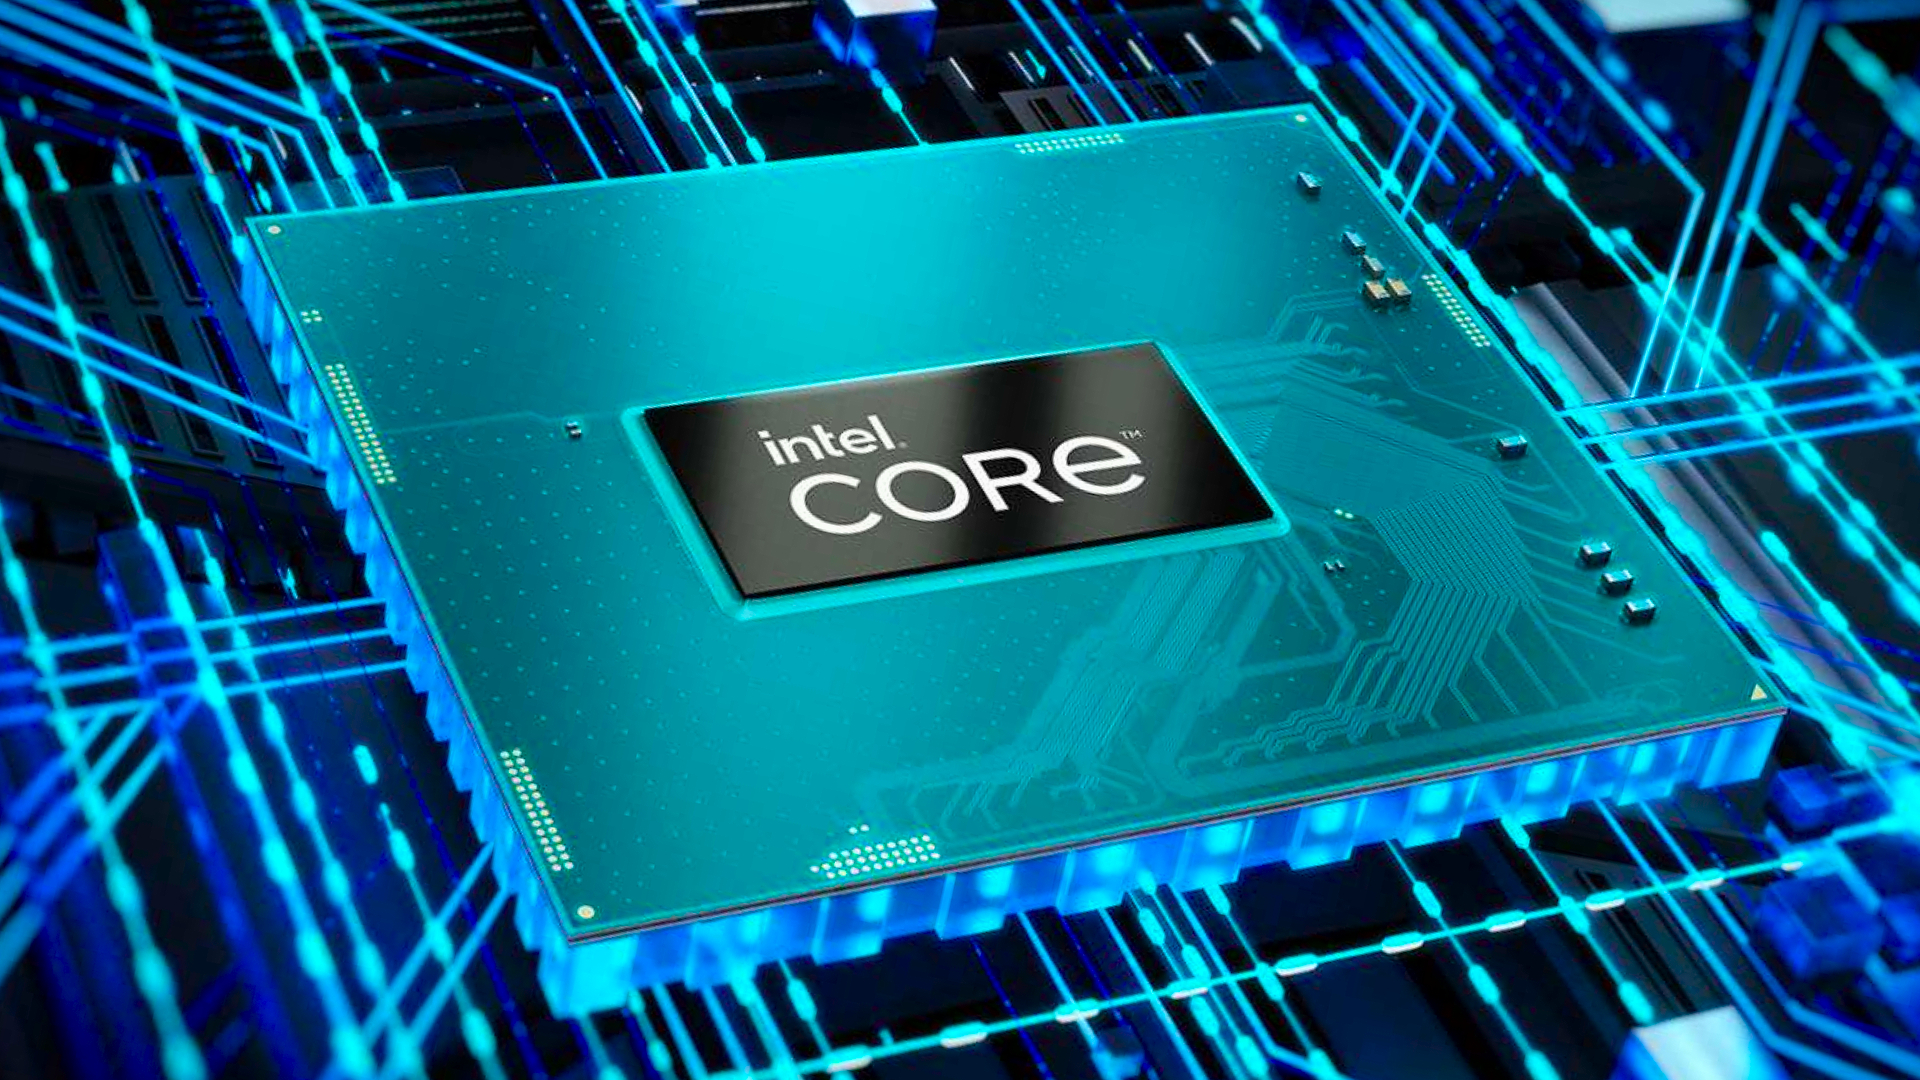 Intel Raptor Lake i9 CPU could become fastest single-core chip